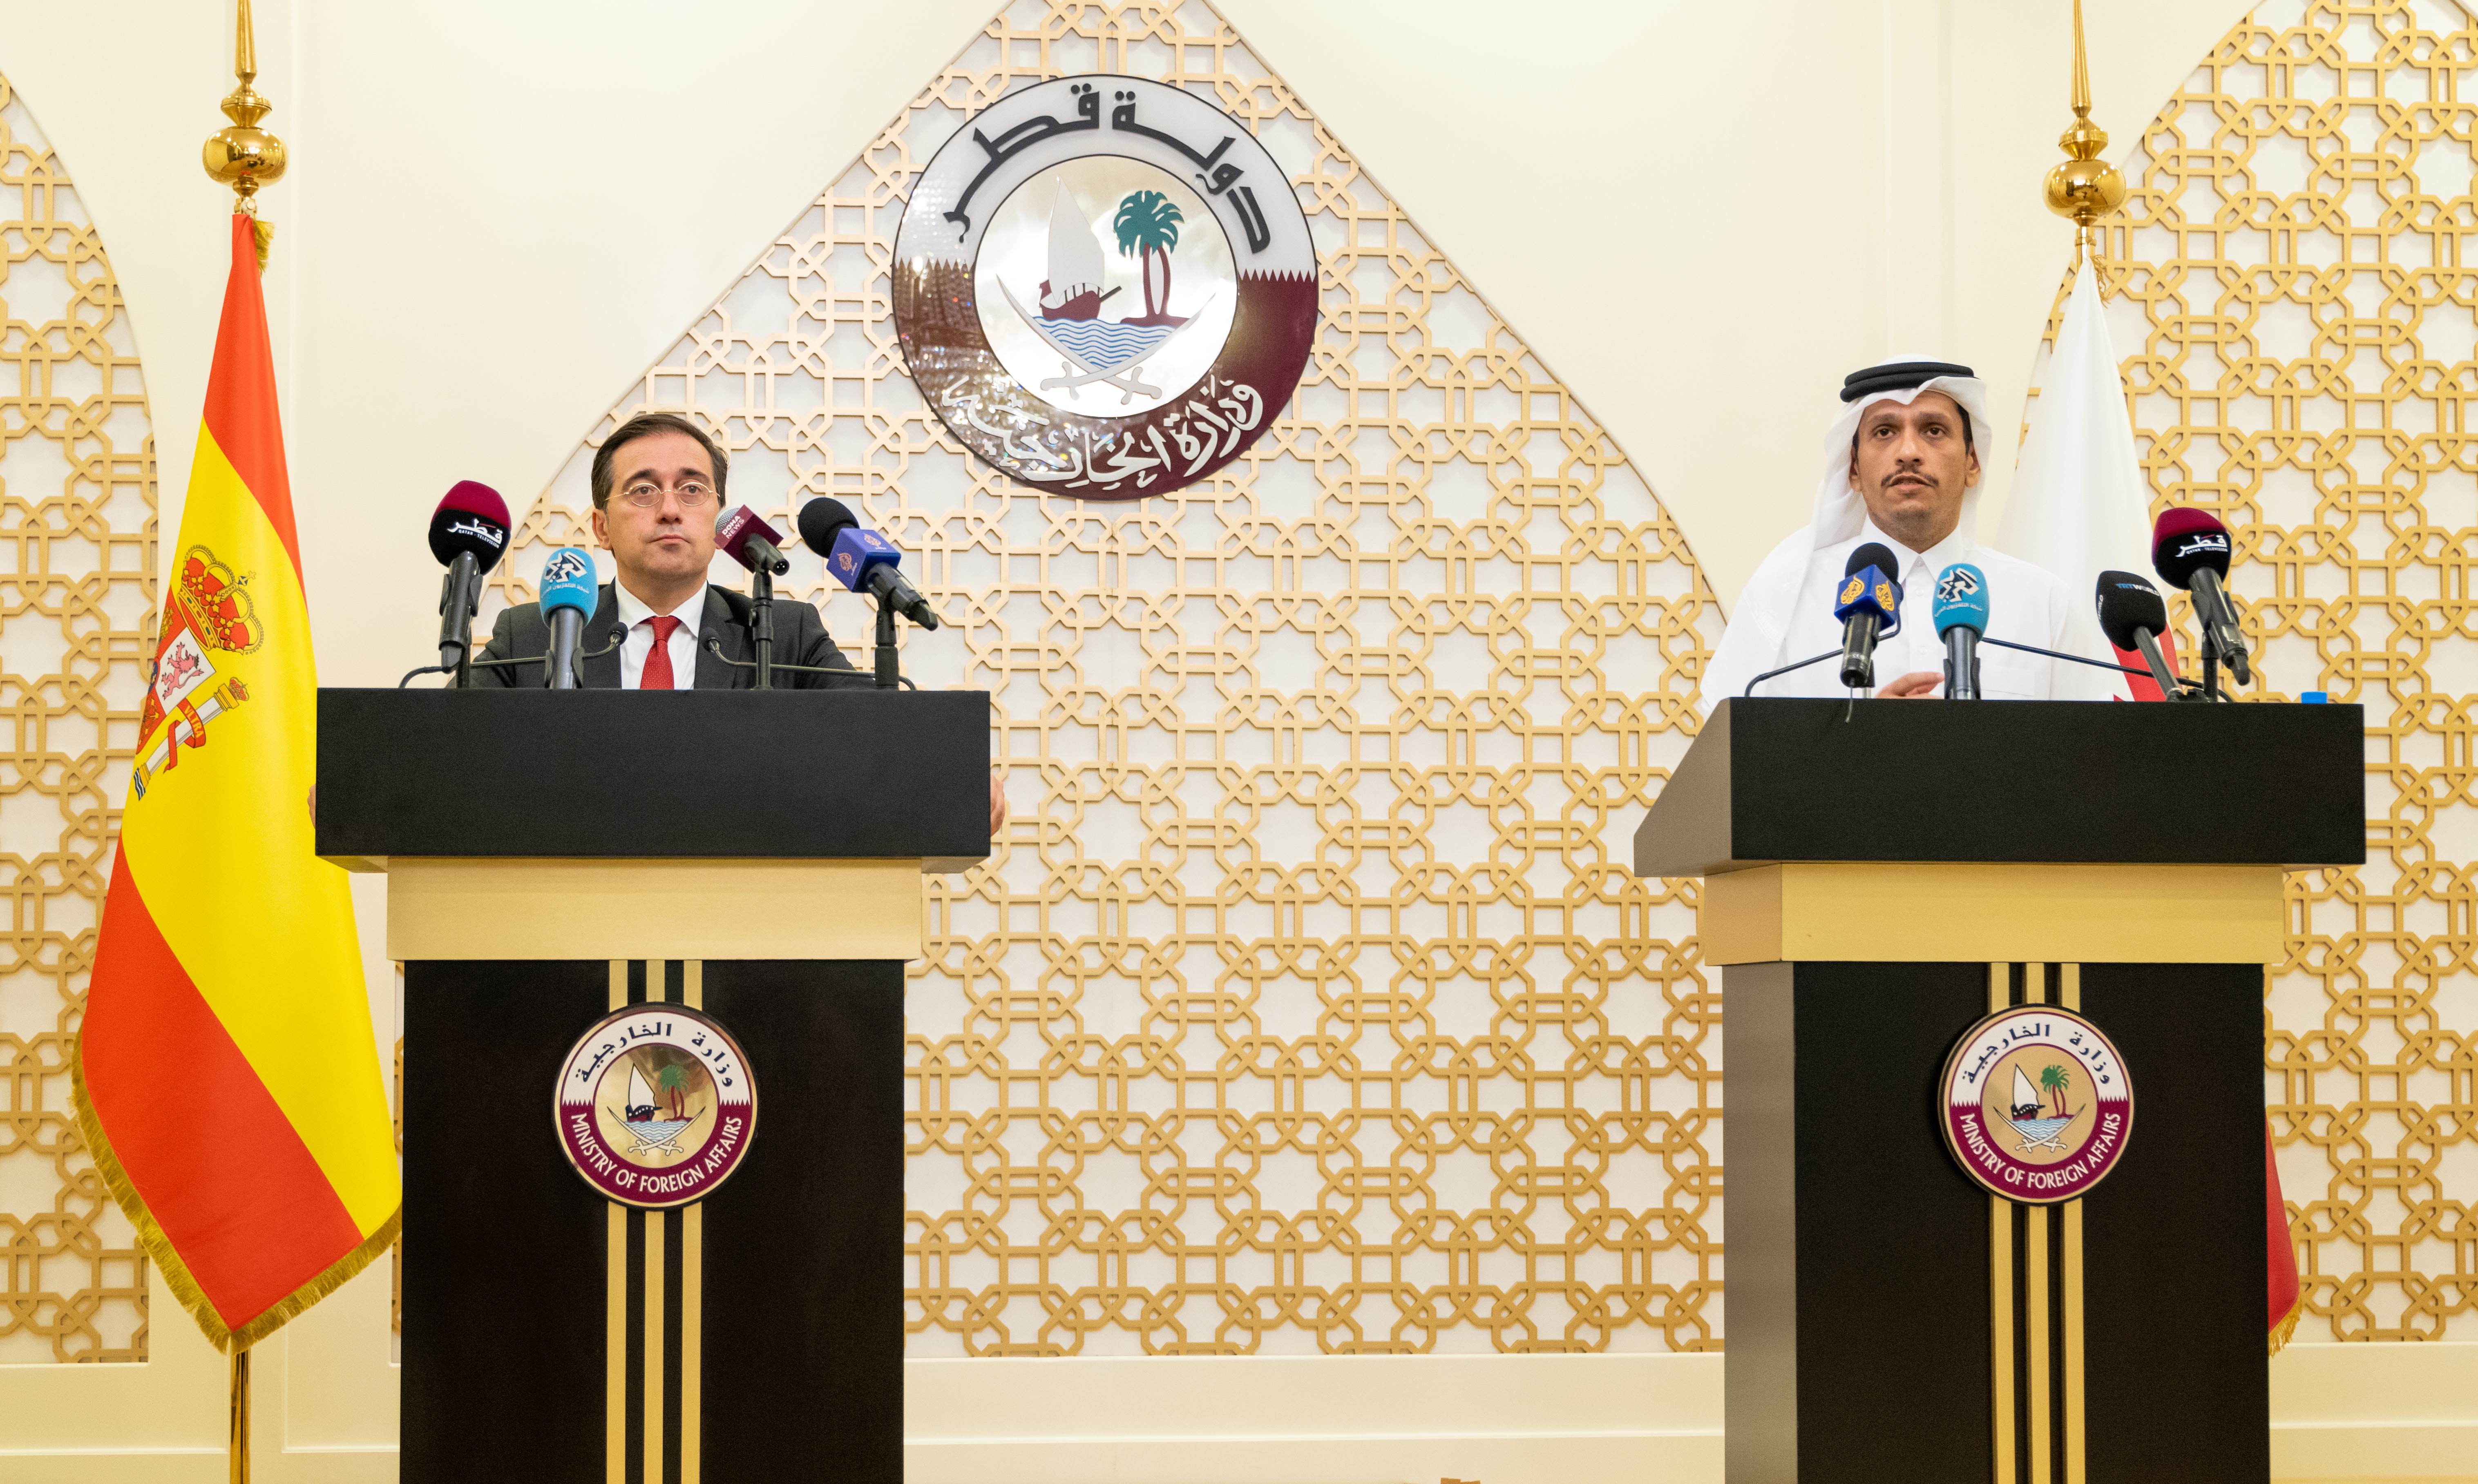 The Deputy Prime Minister and Minister of Foreign Affairs Says Spain is an Important Partner for Qatar